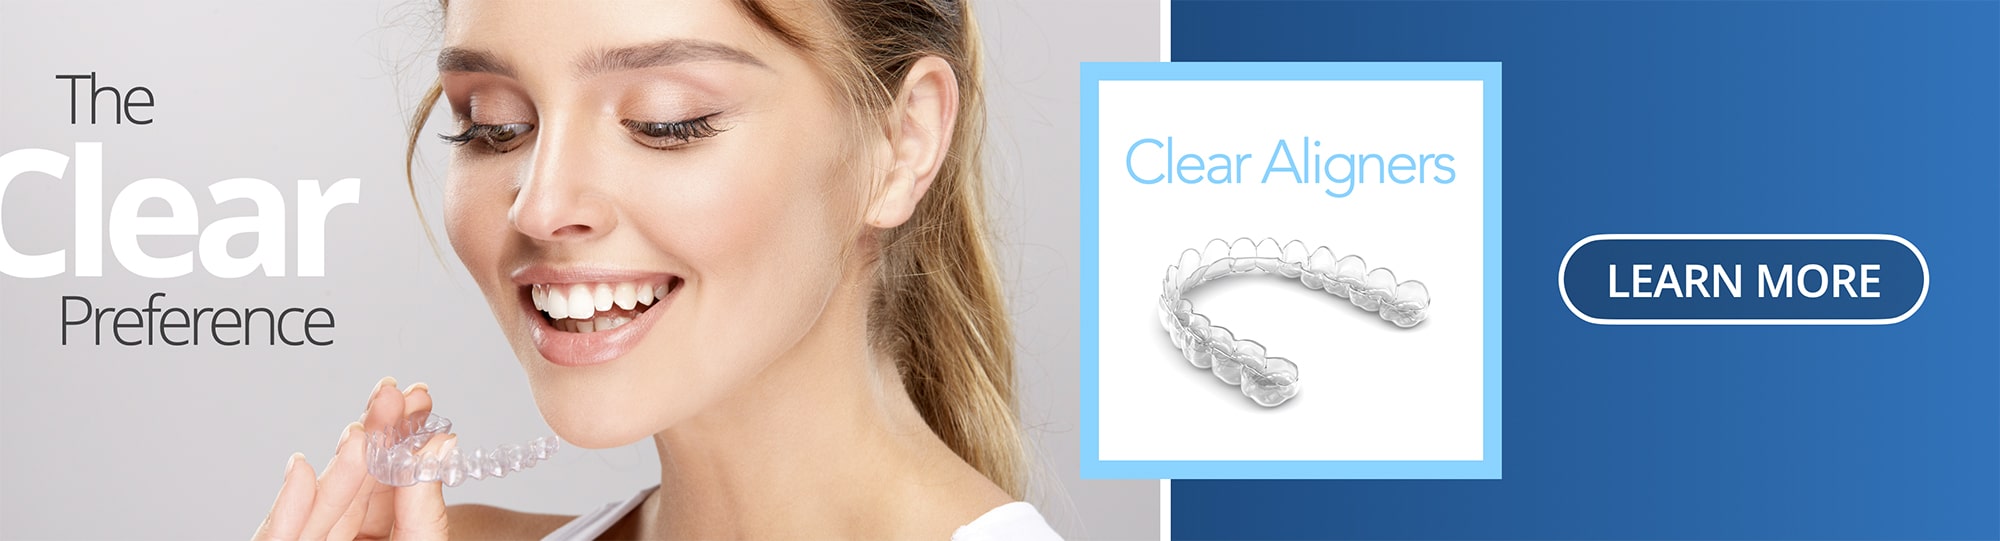 clear aligners click to learn more